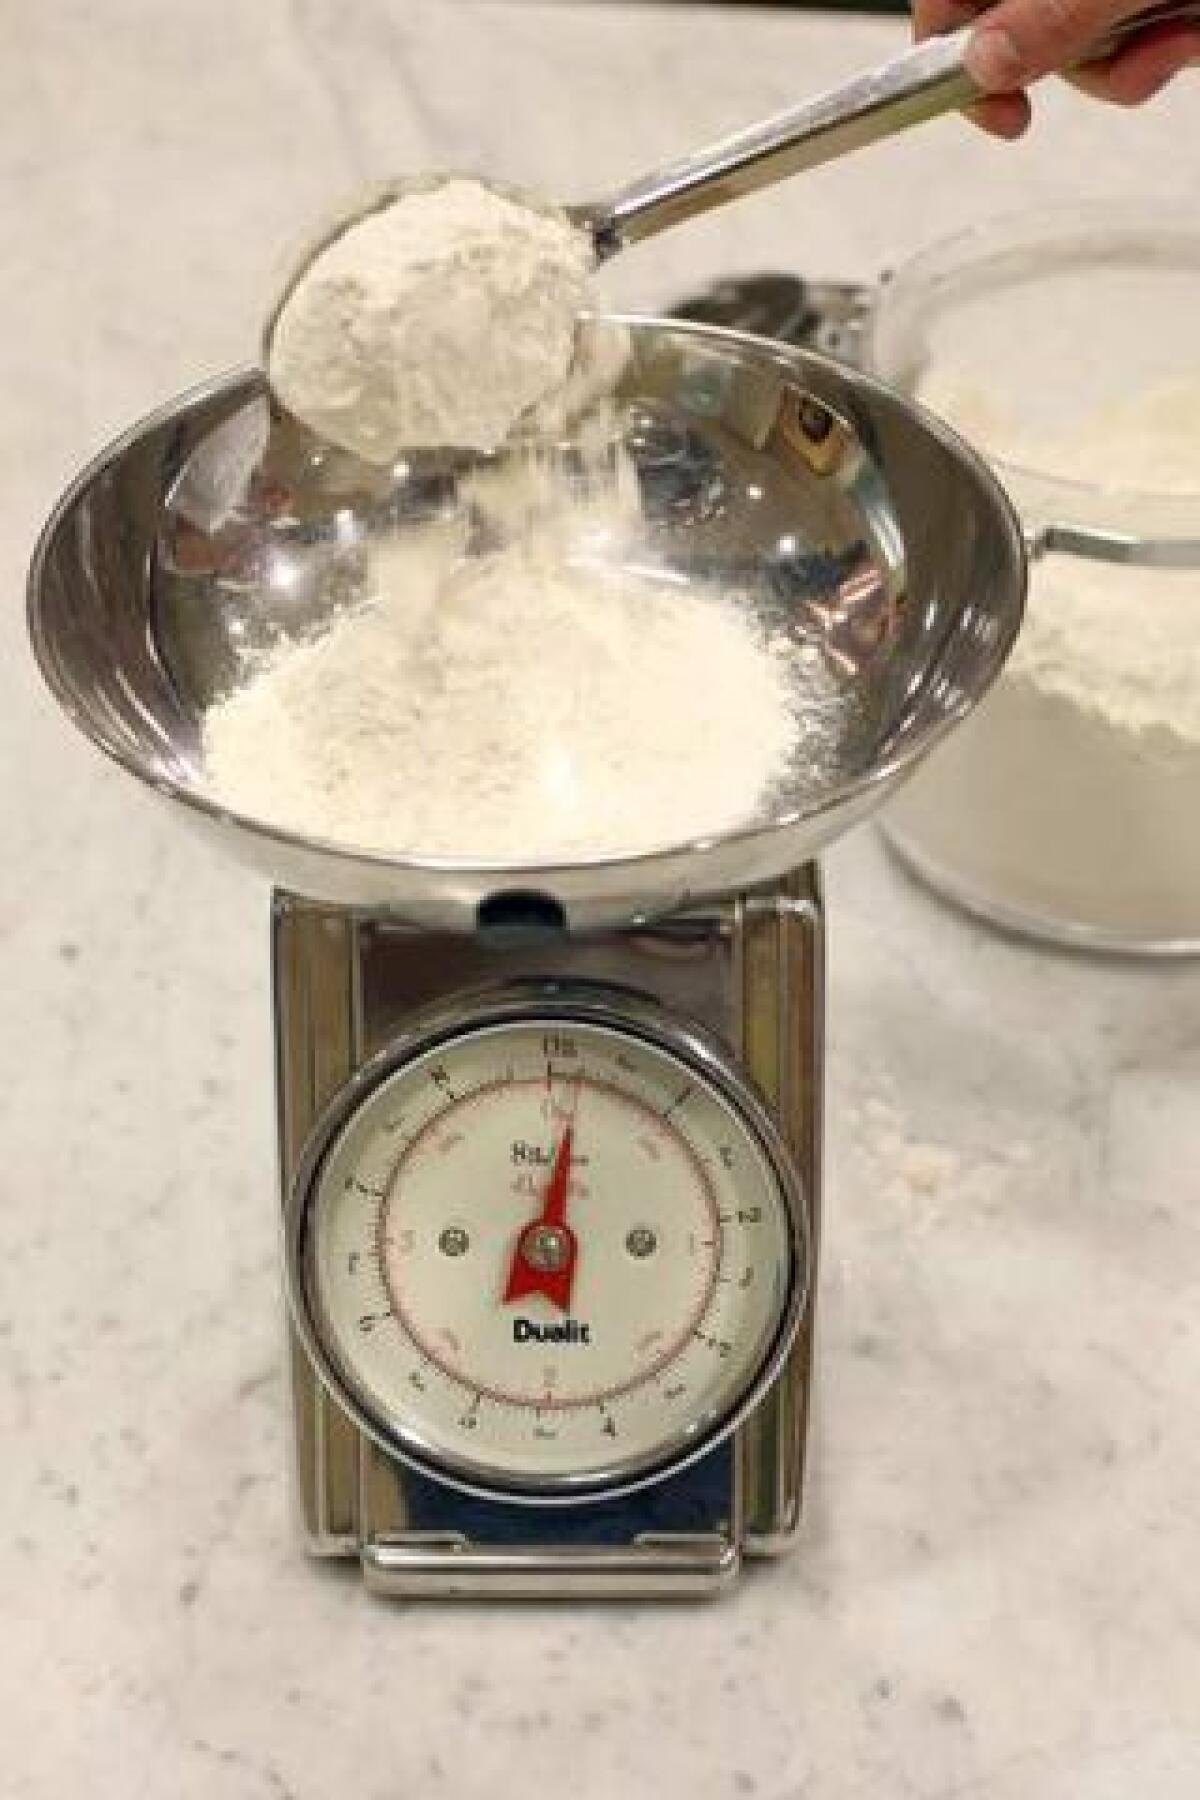 Measure flour using a scale for more accuracy.